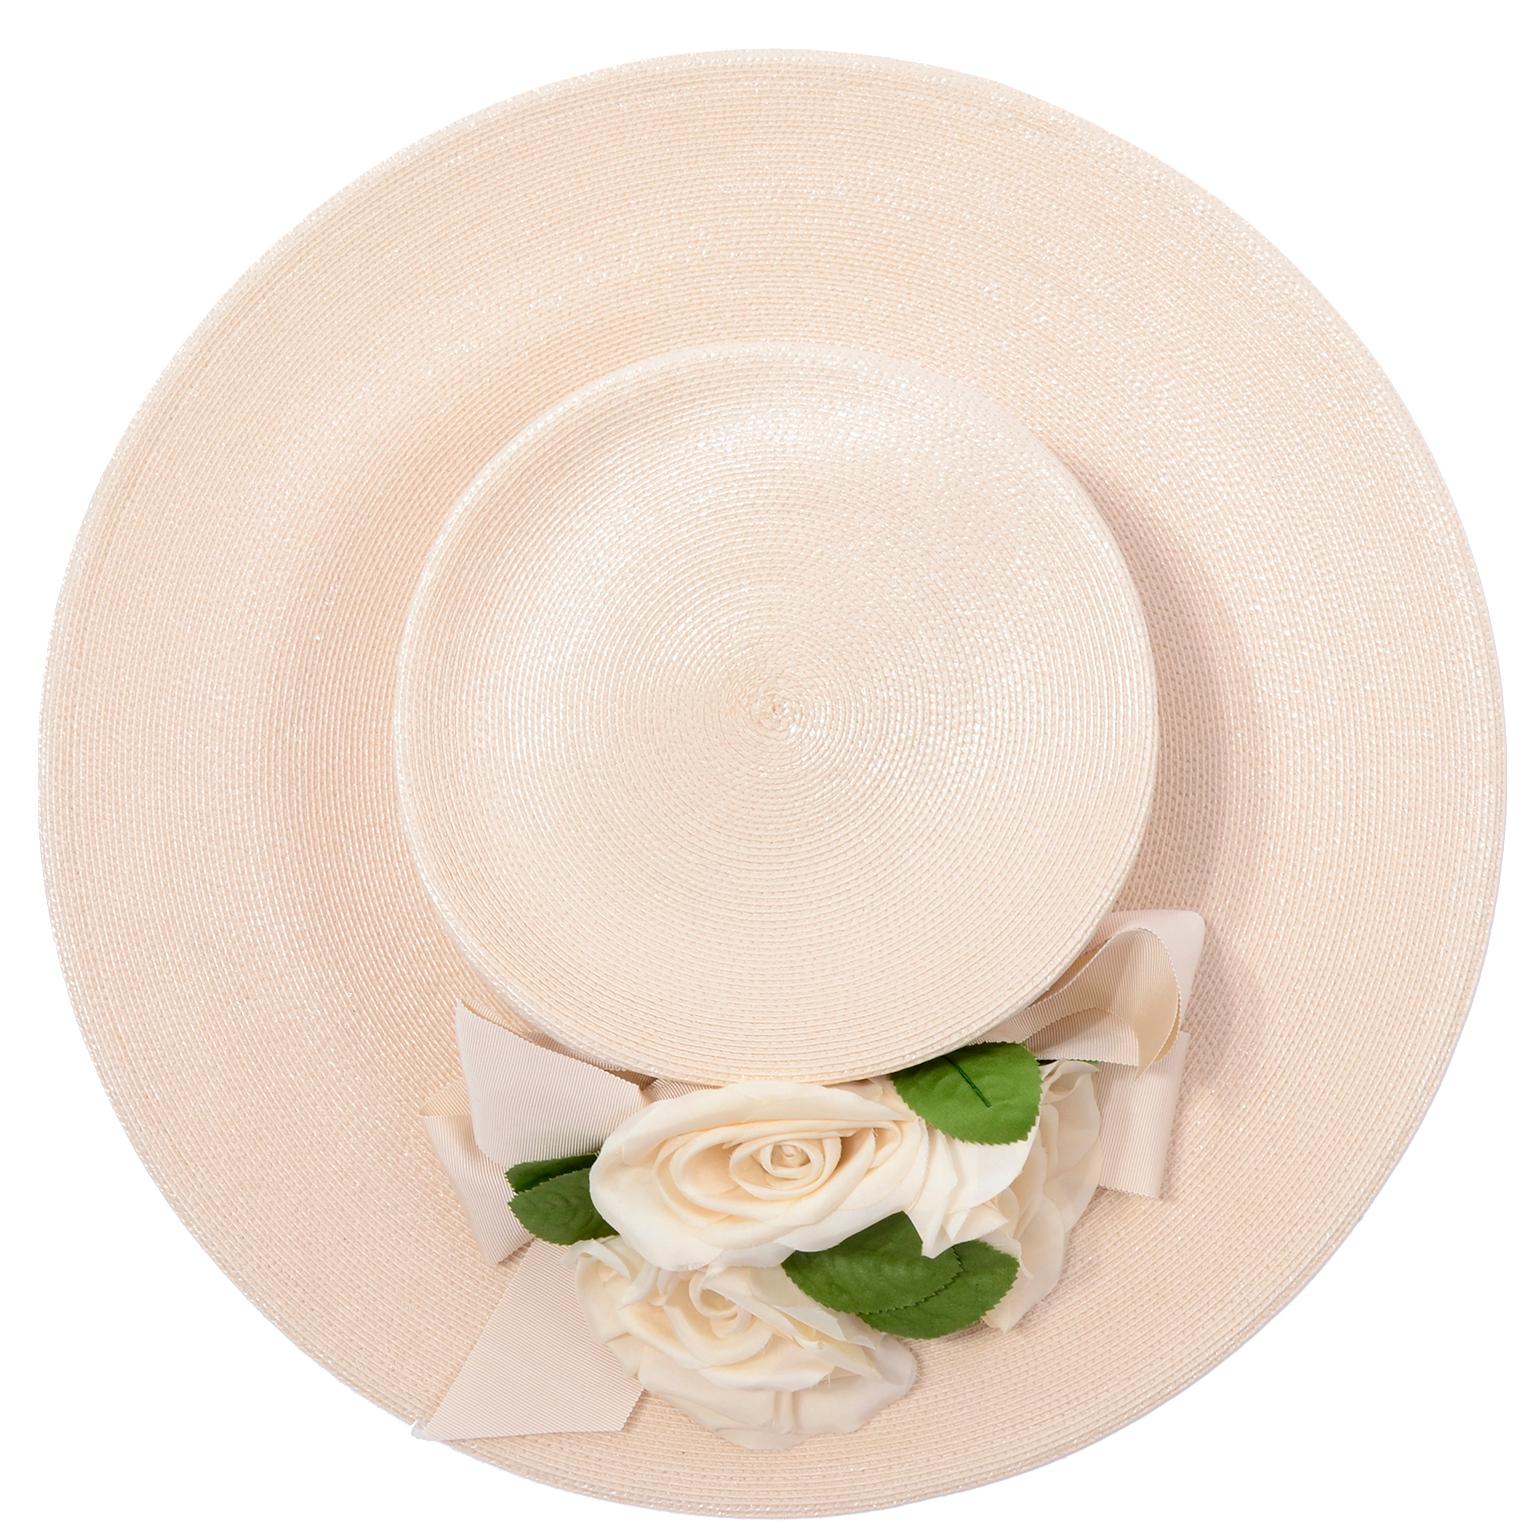 This is a wonderful vintage Frank Olive for Neiman Marcus cream straw hat. The hat has a nice brim with a wide cream bow and three roses with leaves. This pretty hat can be worn with so many different things! Mr. Olive became a milliner when it was